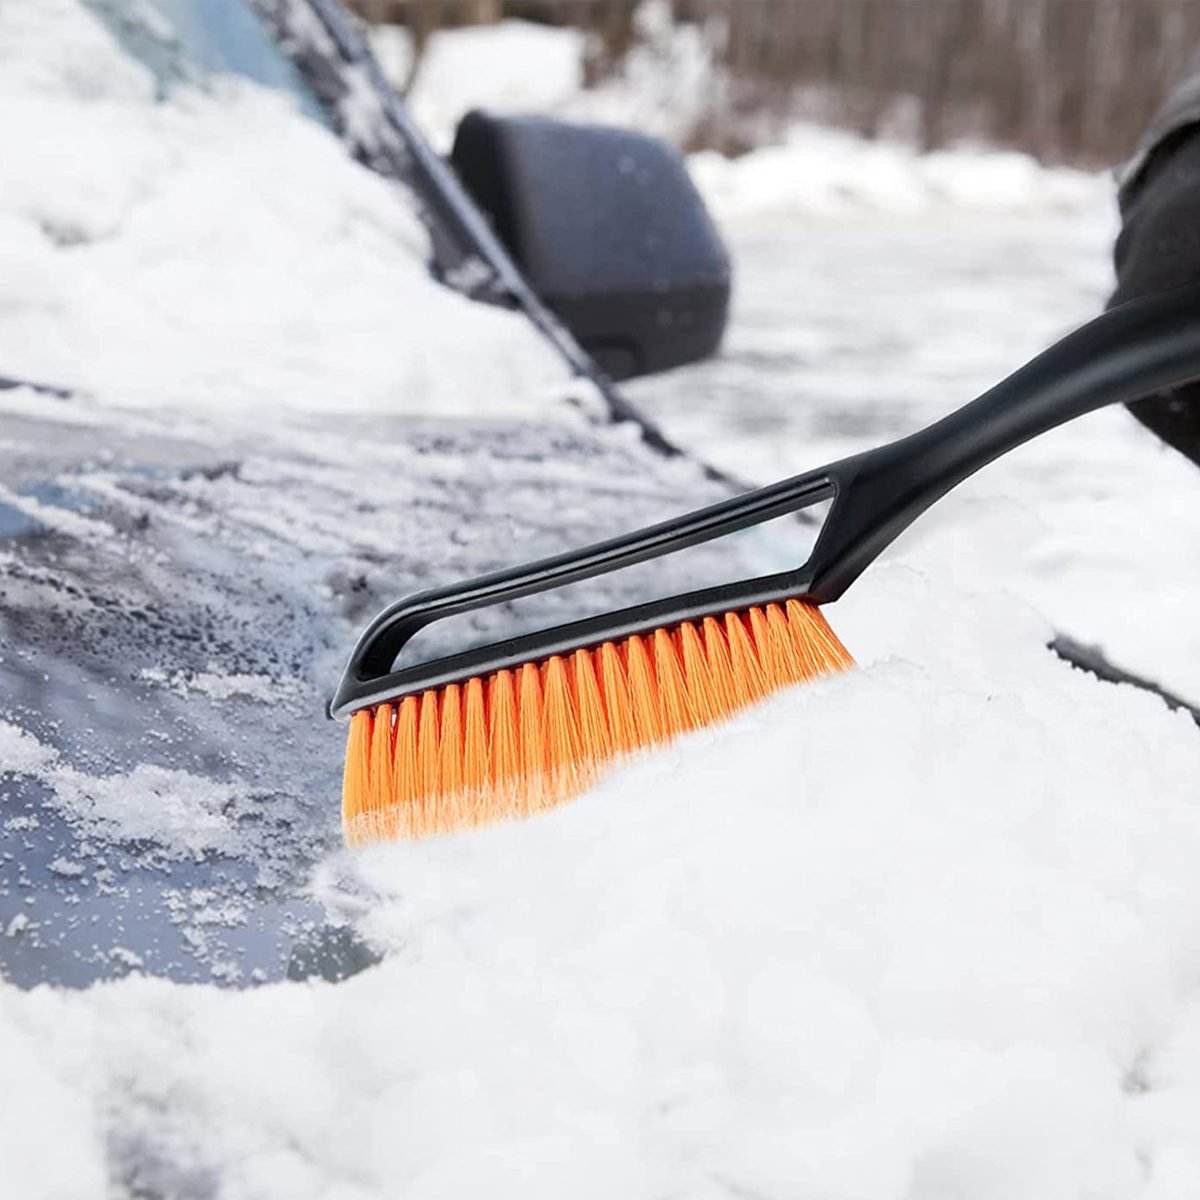 The 6 Best Car Snow Removal Tools to Keep Your Car Clean 2022